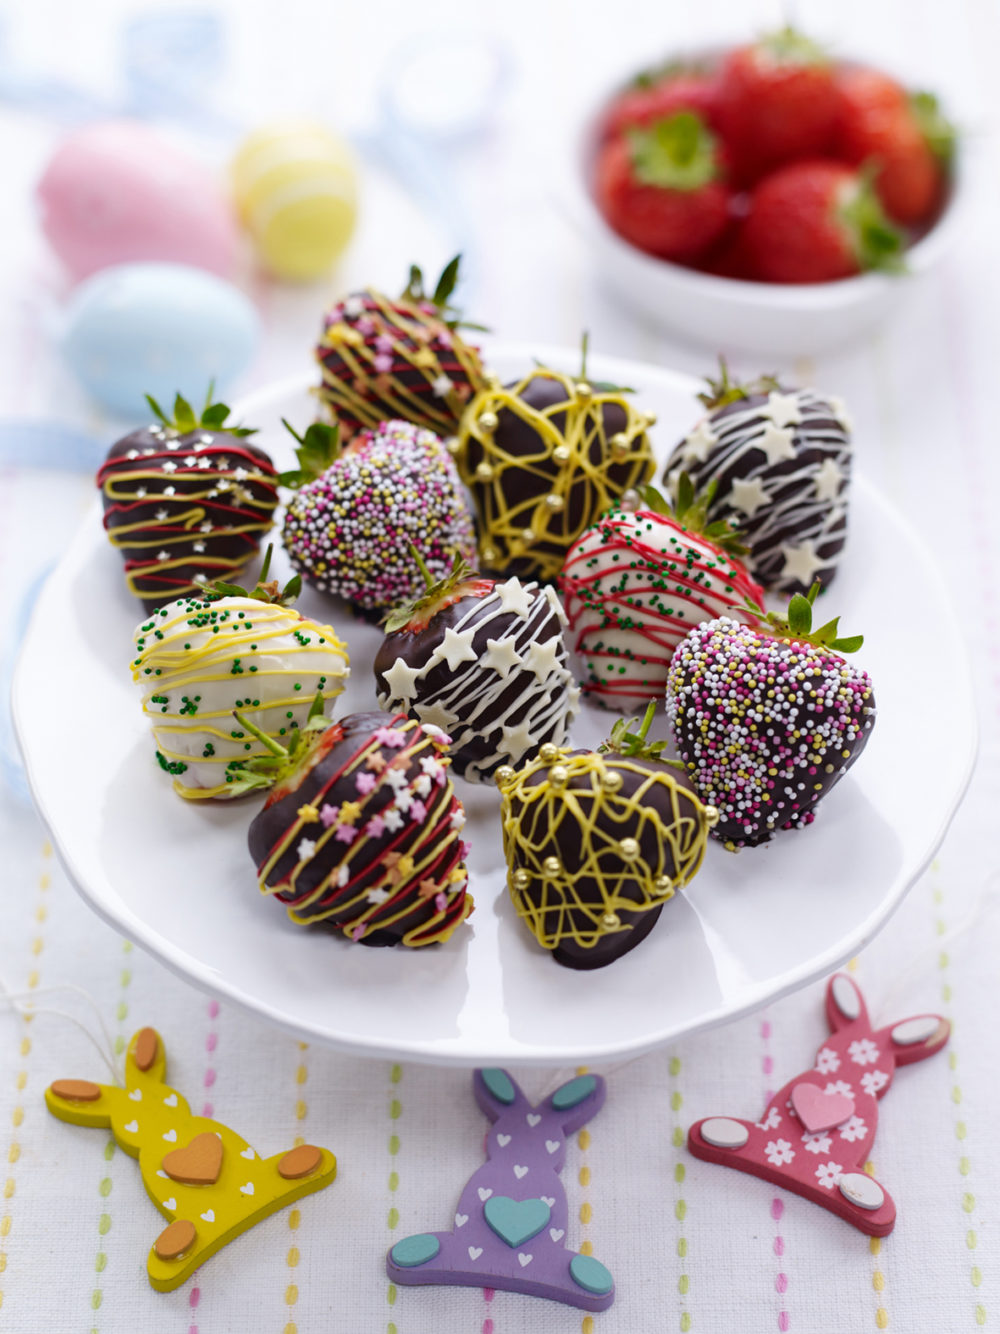 Chocolate dipped strawberries - Yorkshire Food & Drink